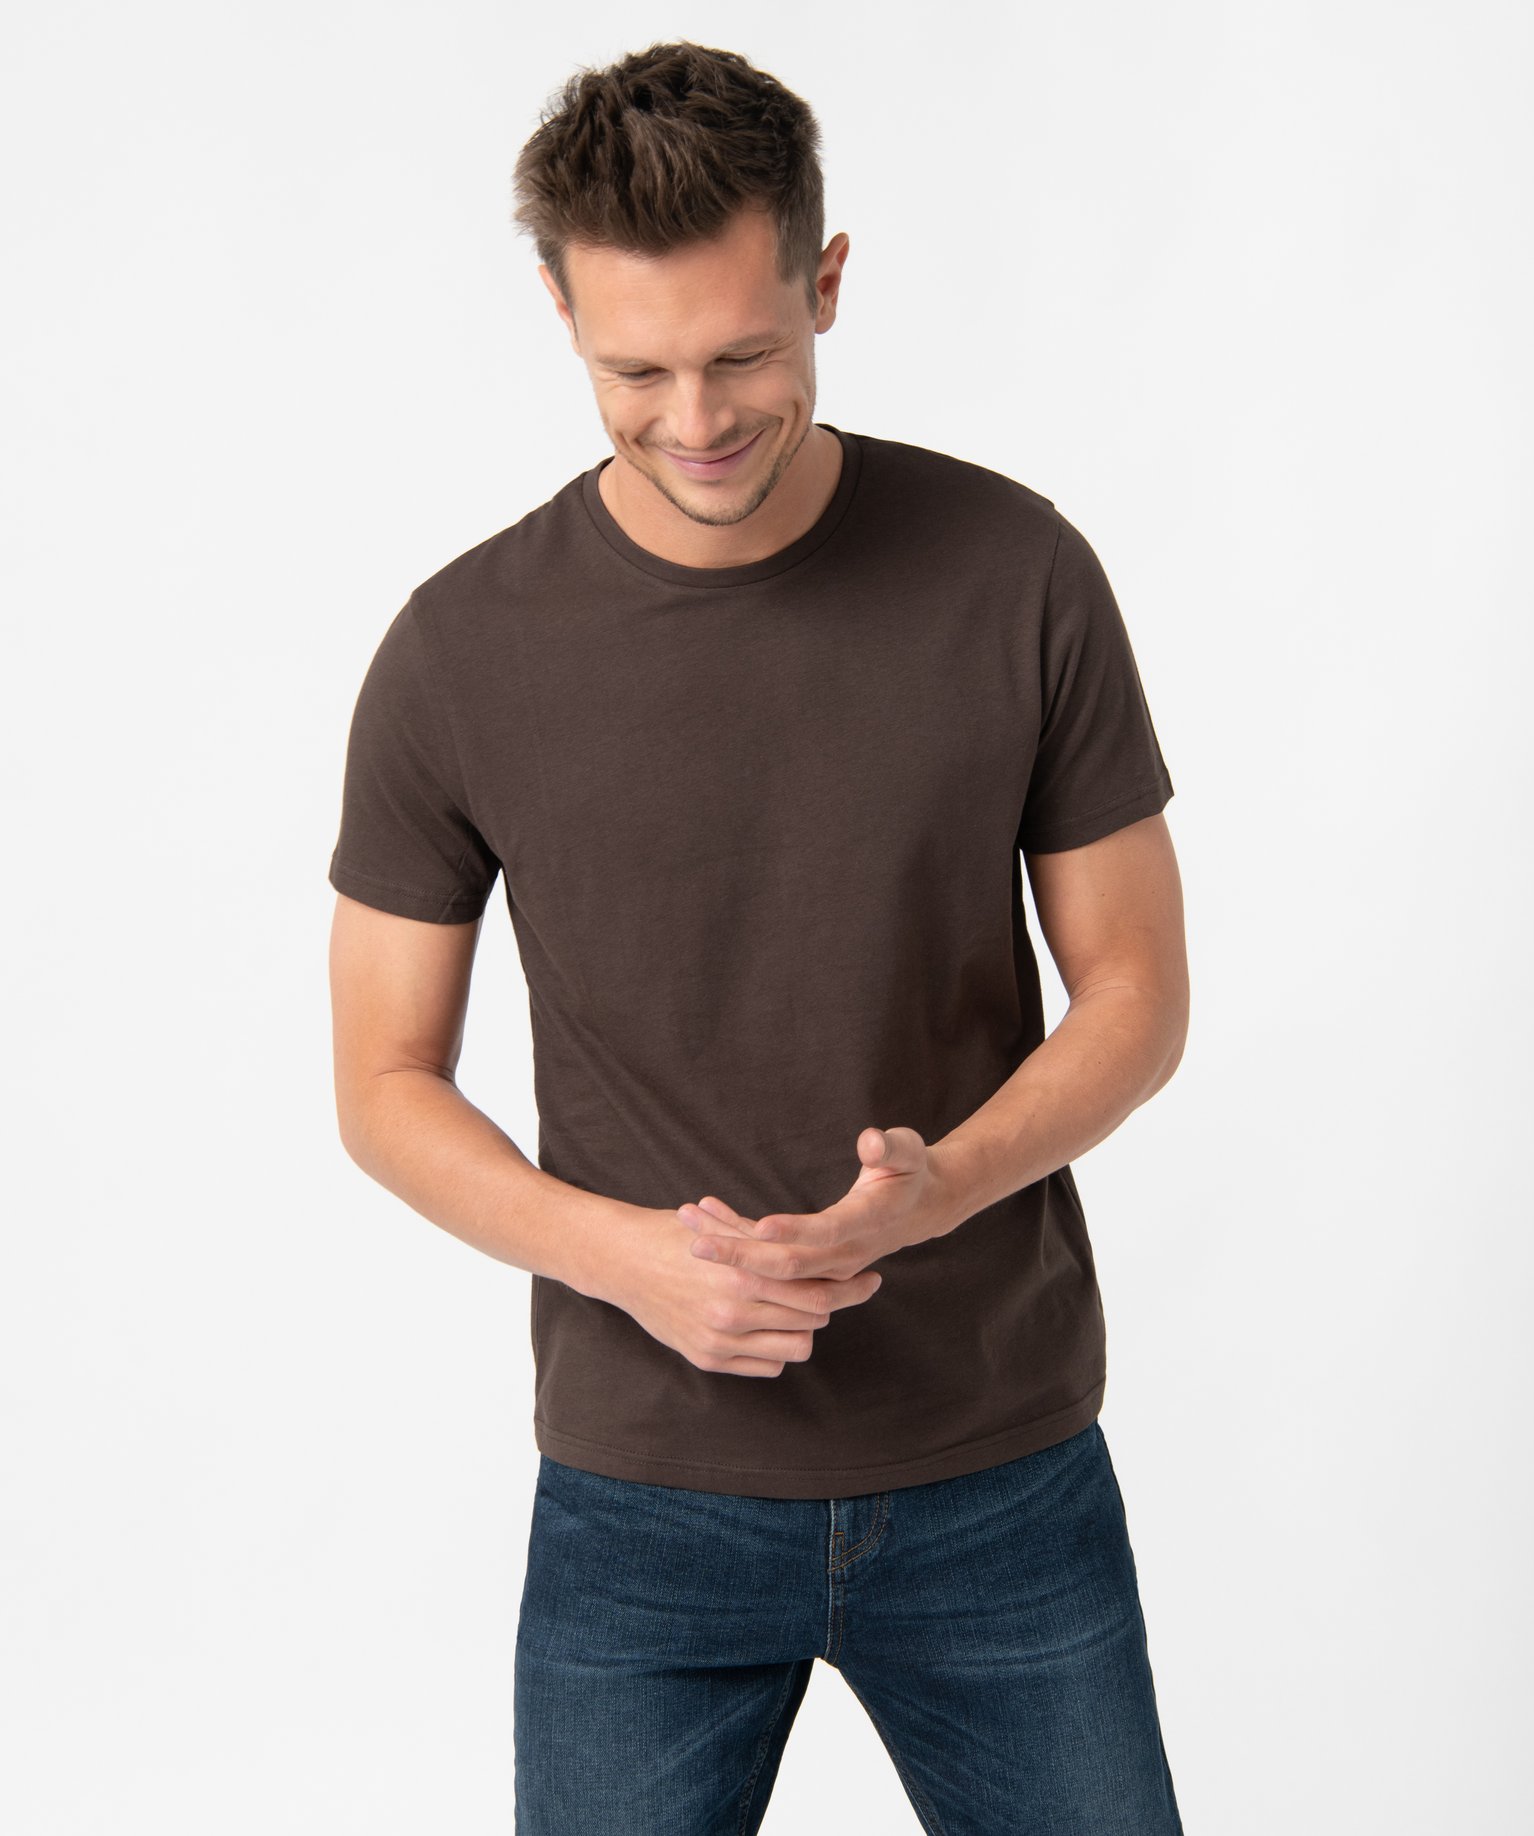 tee-shirt a manches courtes et col rond homme brun tee-shirts